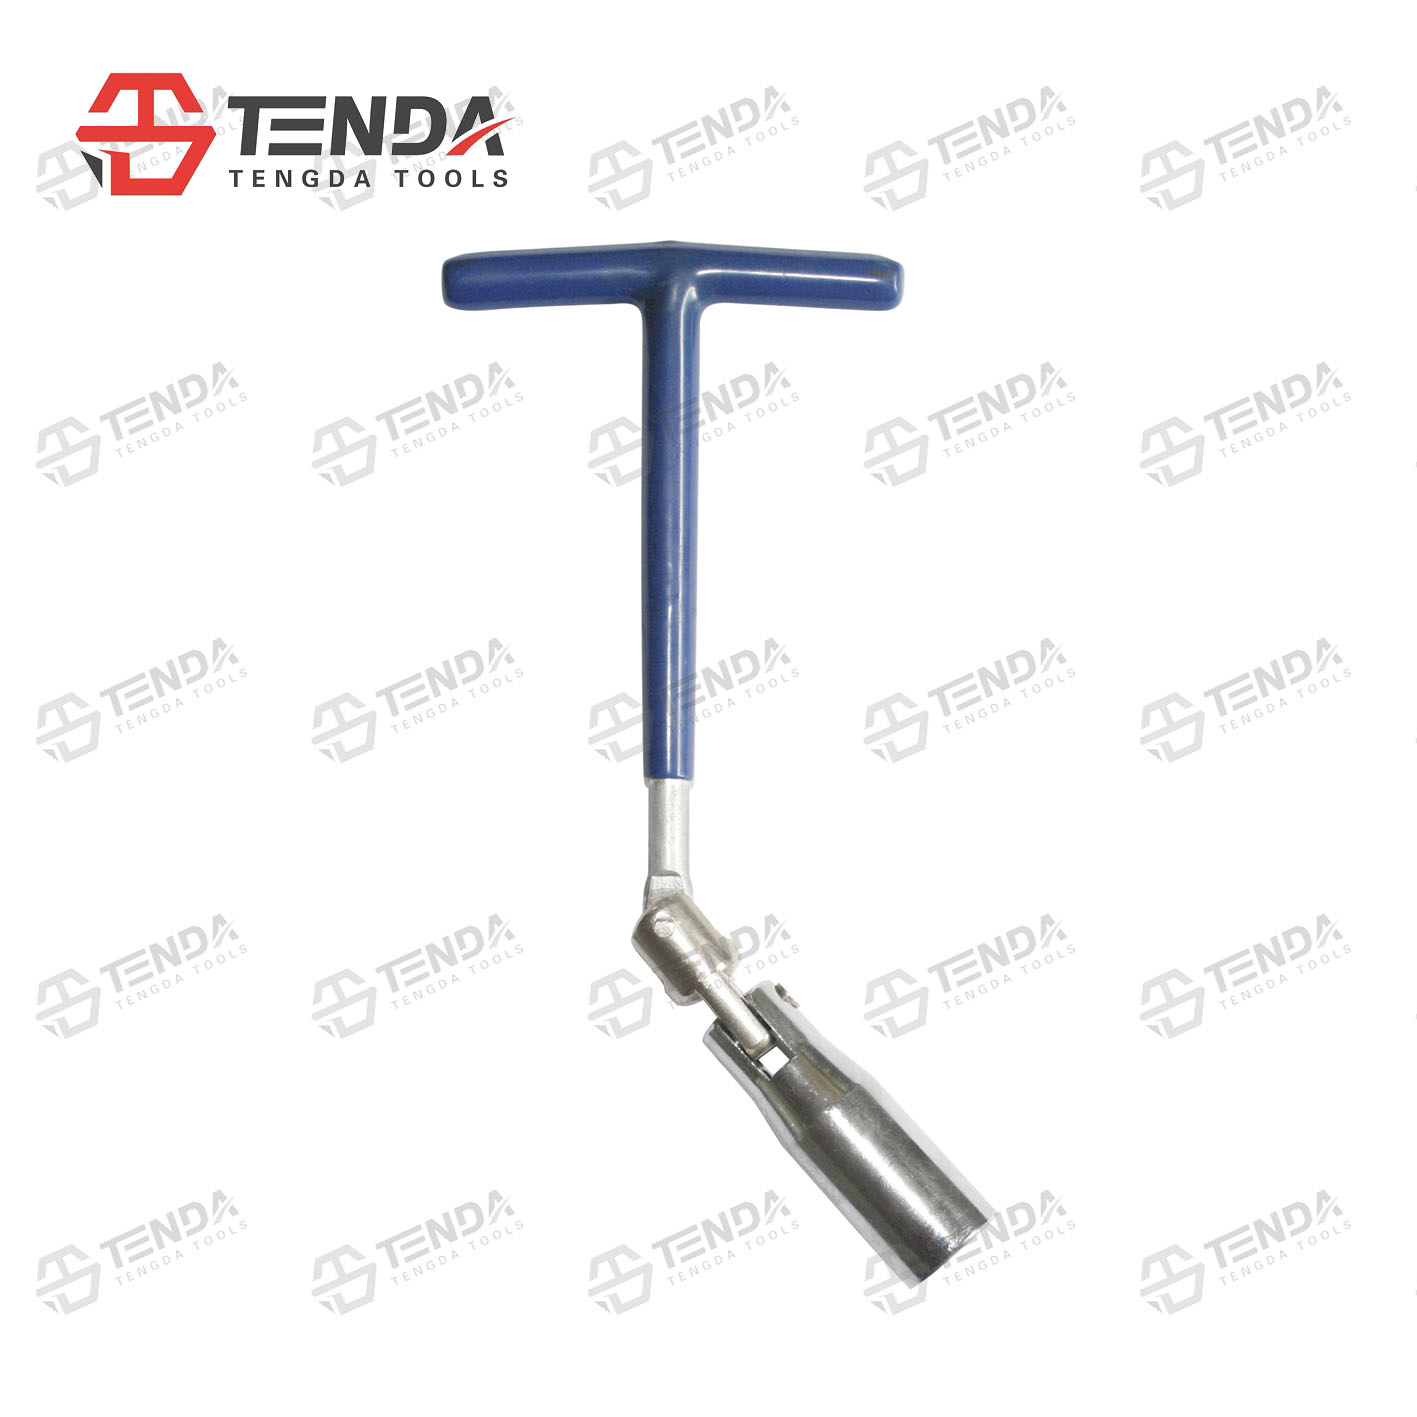 TD-070-04 T-Handle Spark Plug Wrench